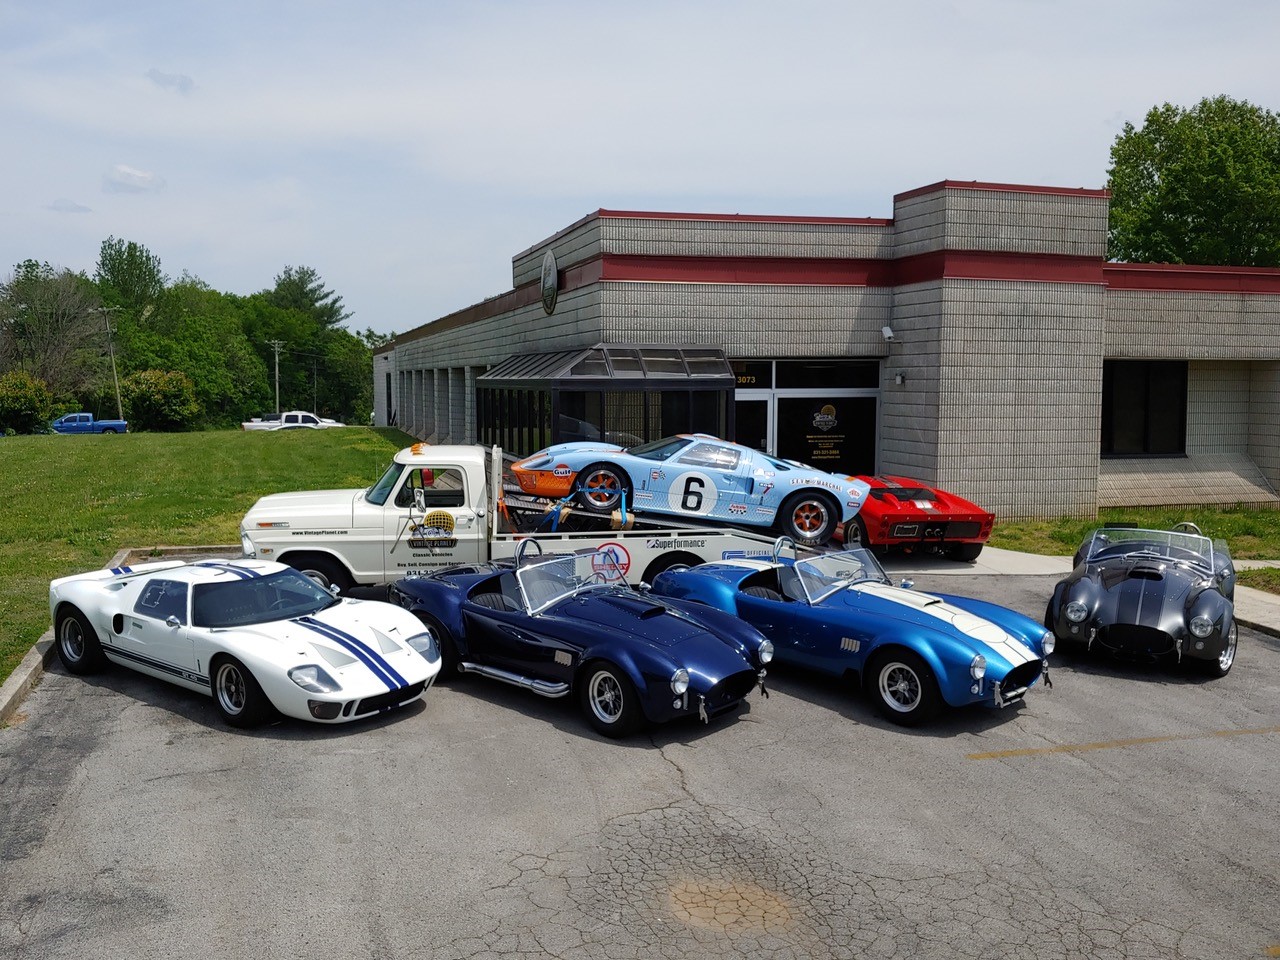 Vintage Planet is the rare muscle and sports car source in Cookeville, Tennessee.